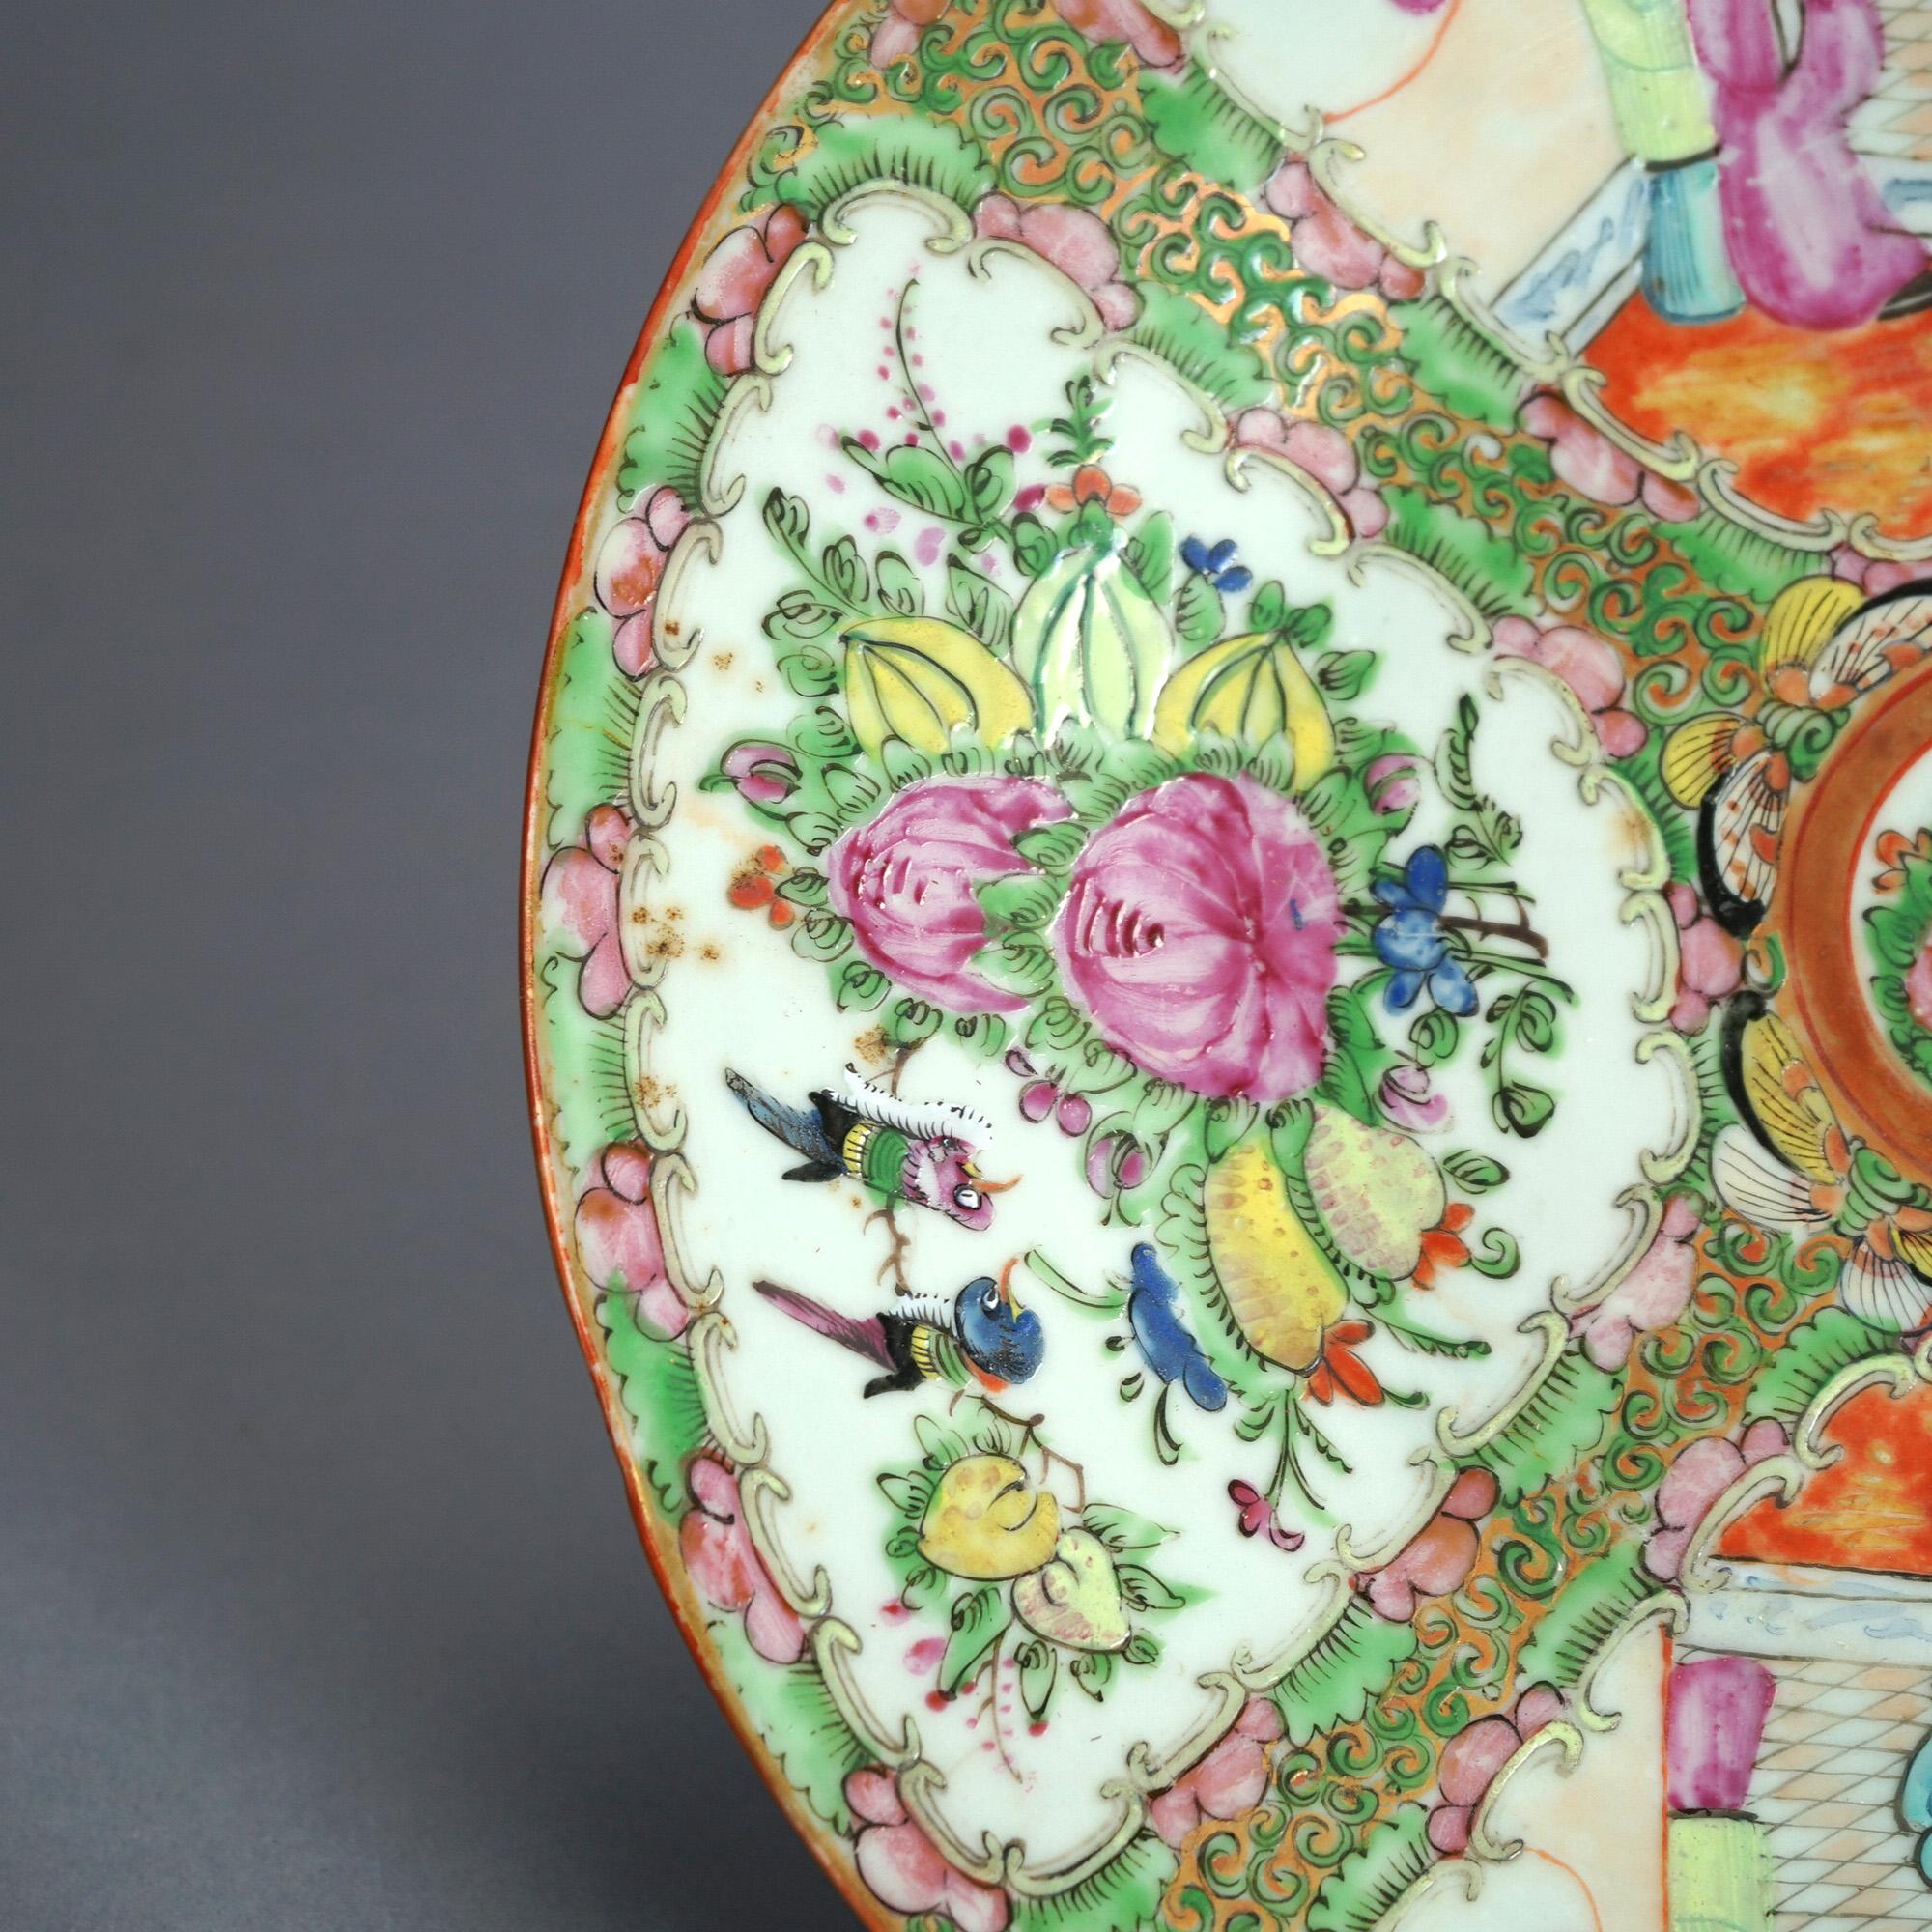 Antique Chinese Rose Medallion Porcelain Charger with Reserves having Gardens & Genre Scenes C1900

Measures - 1.5